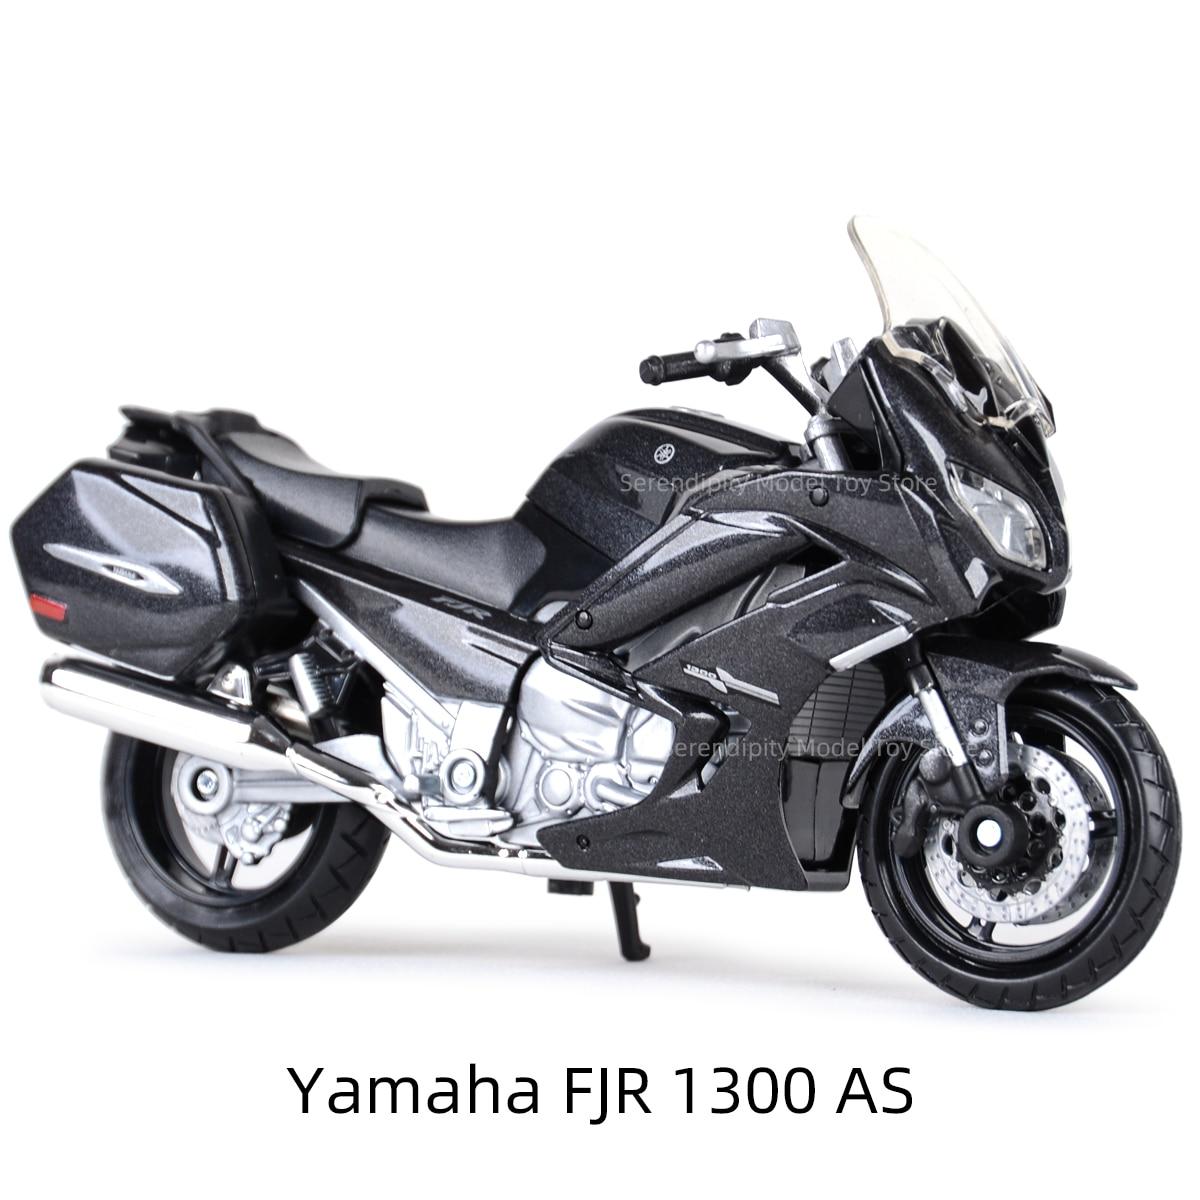 Bburago-1-18-Yamaha-FJR-1300-AS-Static-Die-Cast-Vehicles-Collectible-Motorcycle-Model-Toys.jpg